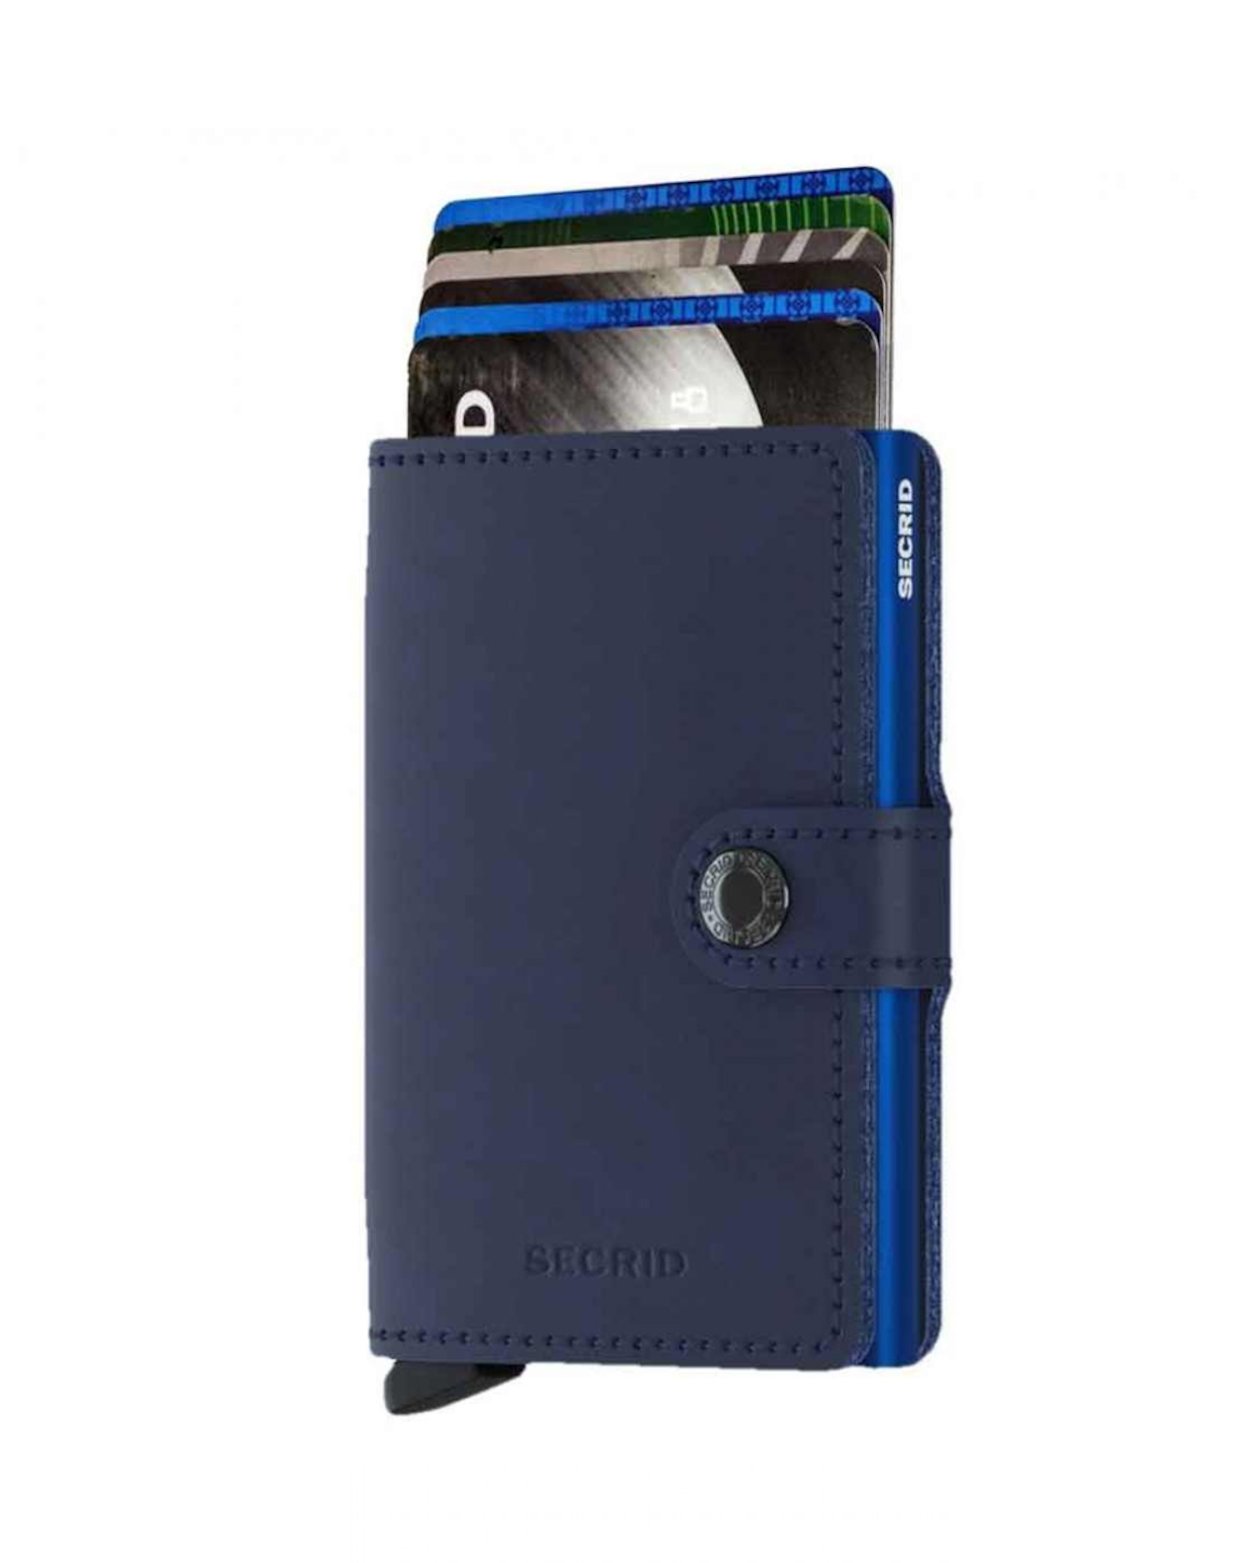 Secrid Wallet And Card Protector In Navy - Mens Accessories | Avoca